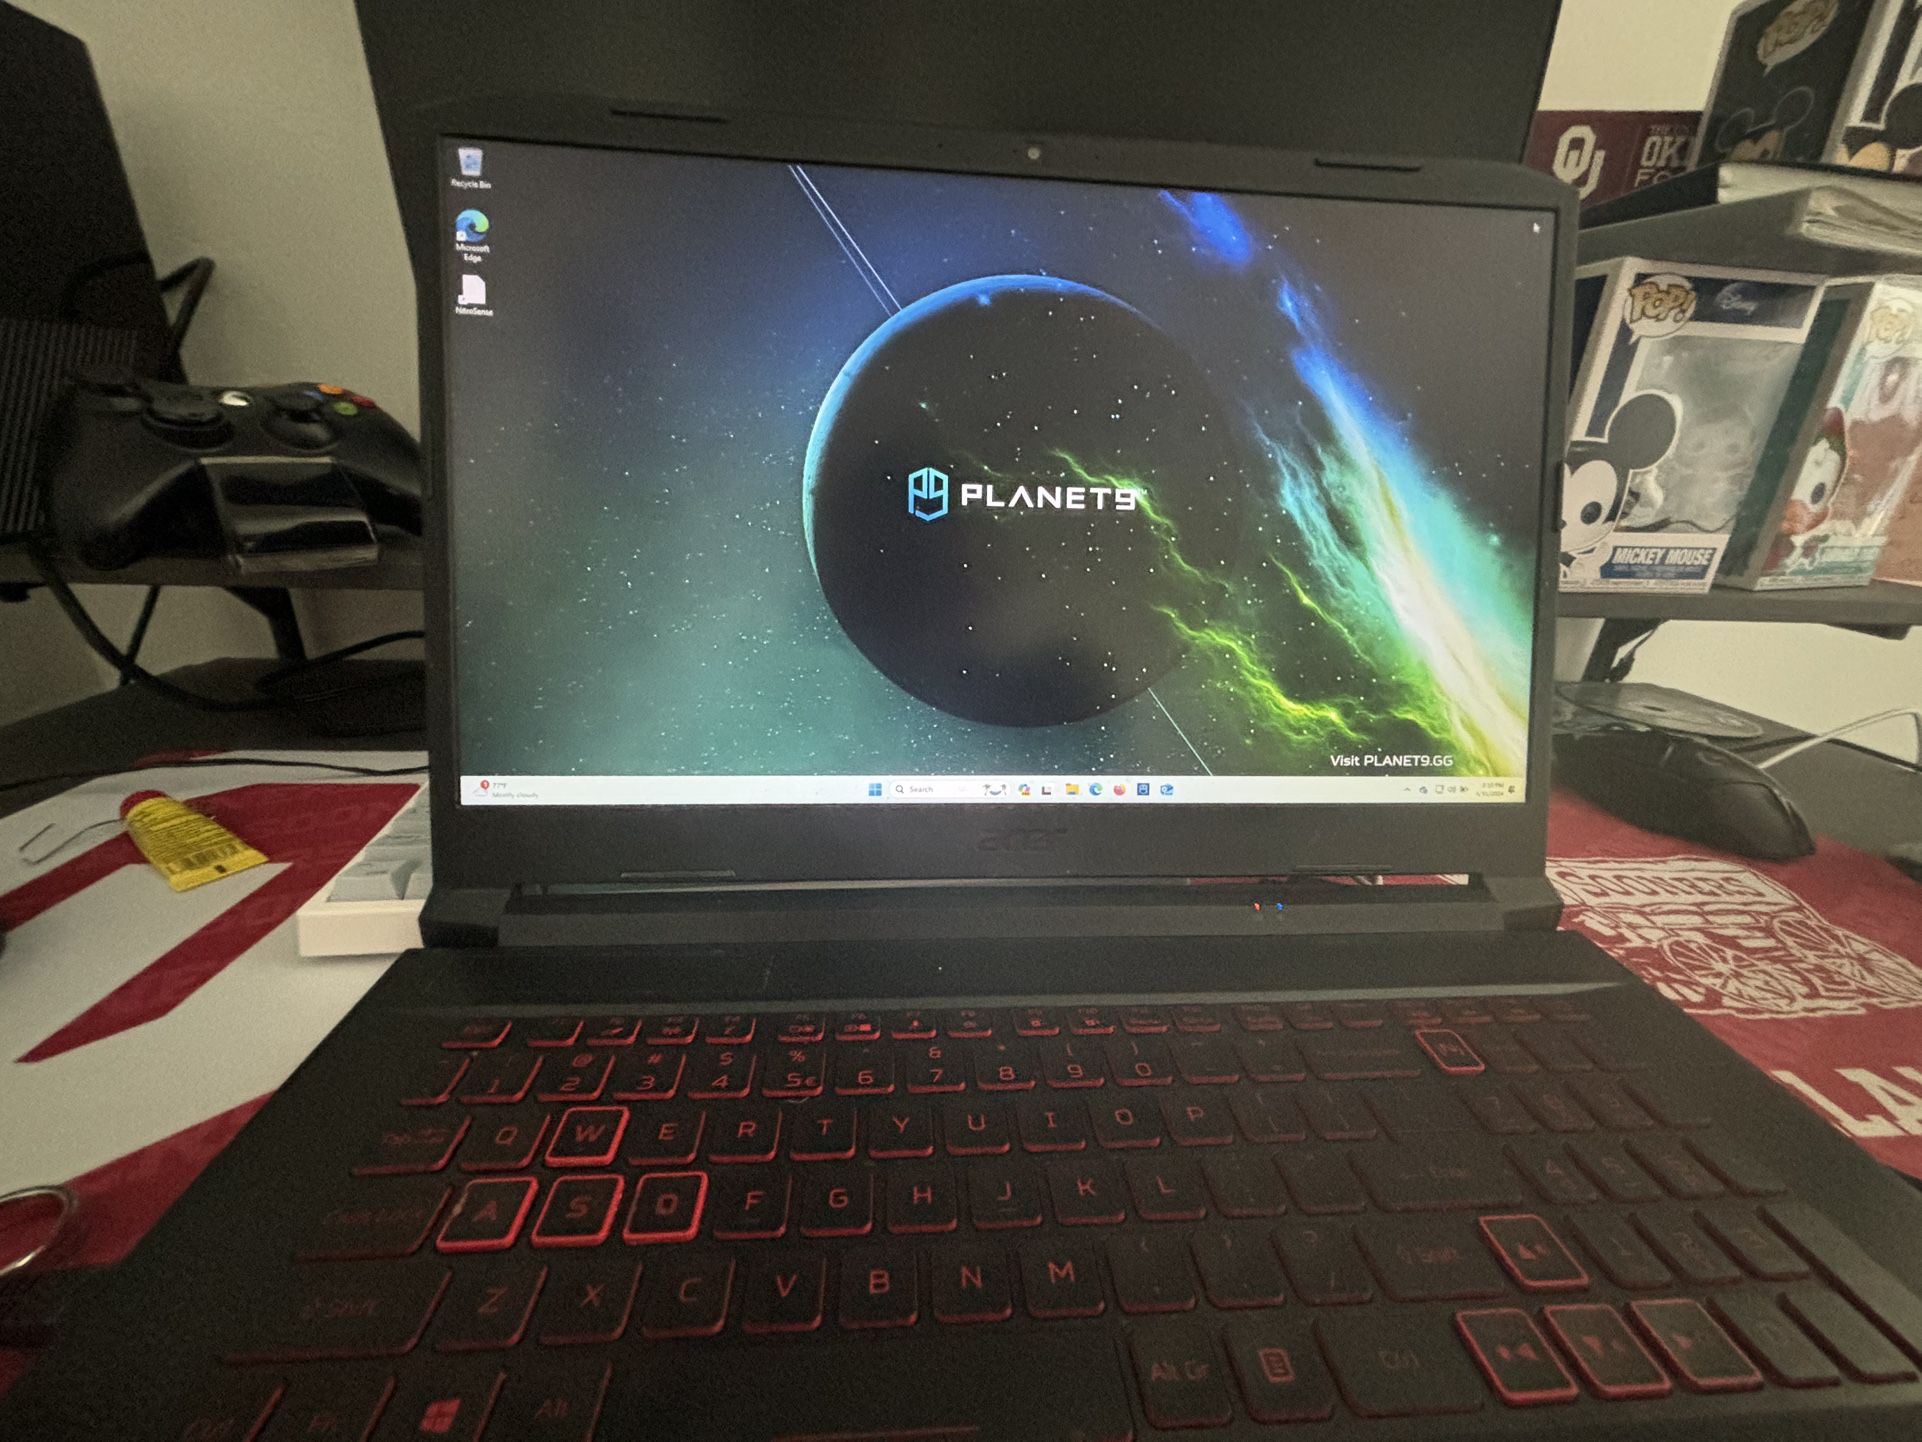 Acer nitro 5 gaming laptop with a light up keyboard 